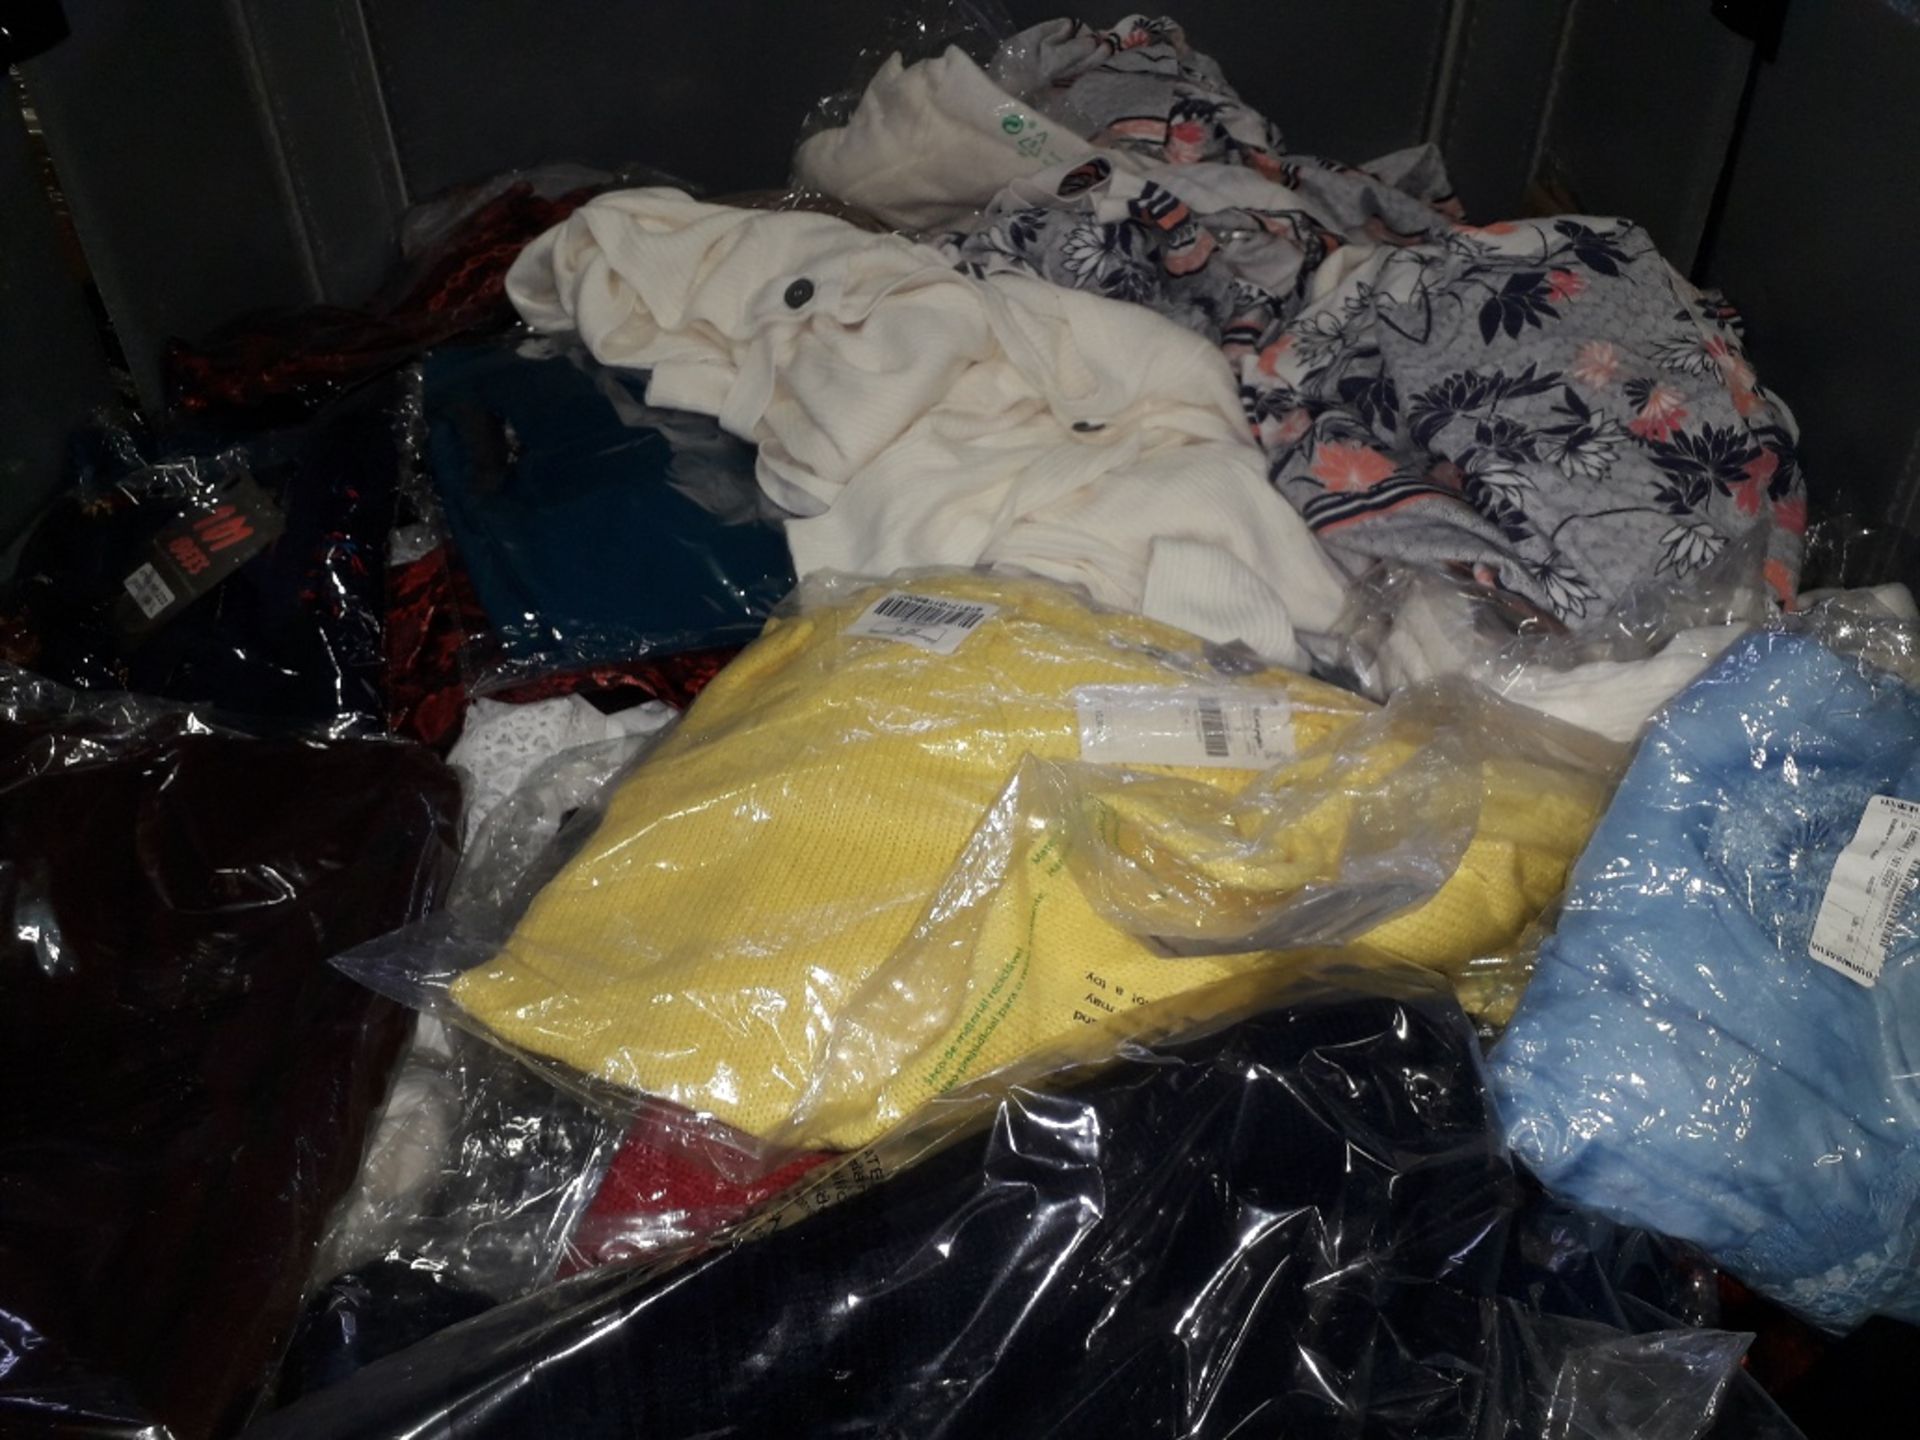 FULL PALLET OF RETAIL COTHING IE. EL CORLE FRINGLE CARDIGANS, 101 IDEES ZIP UP TOPS, BLING